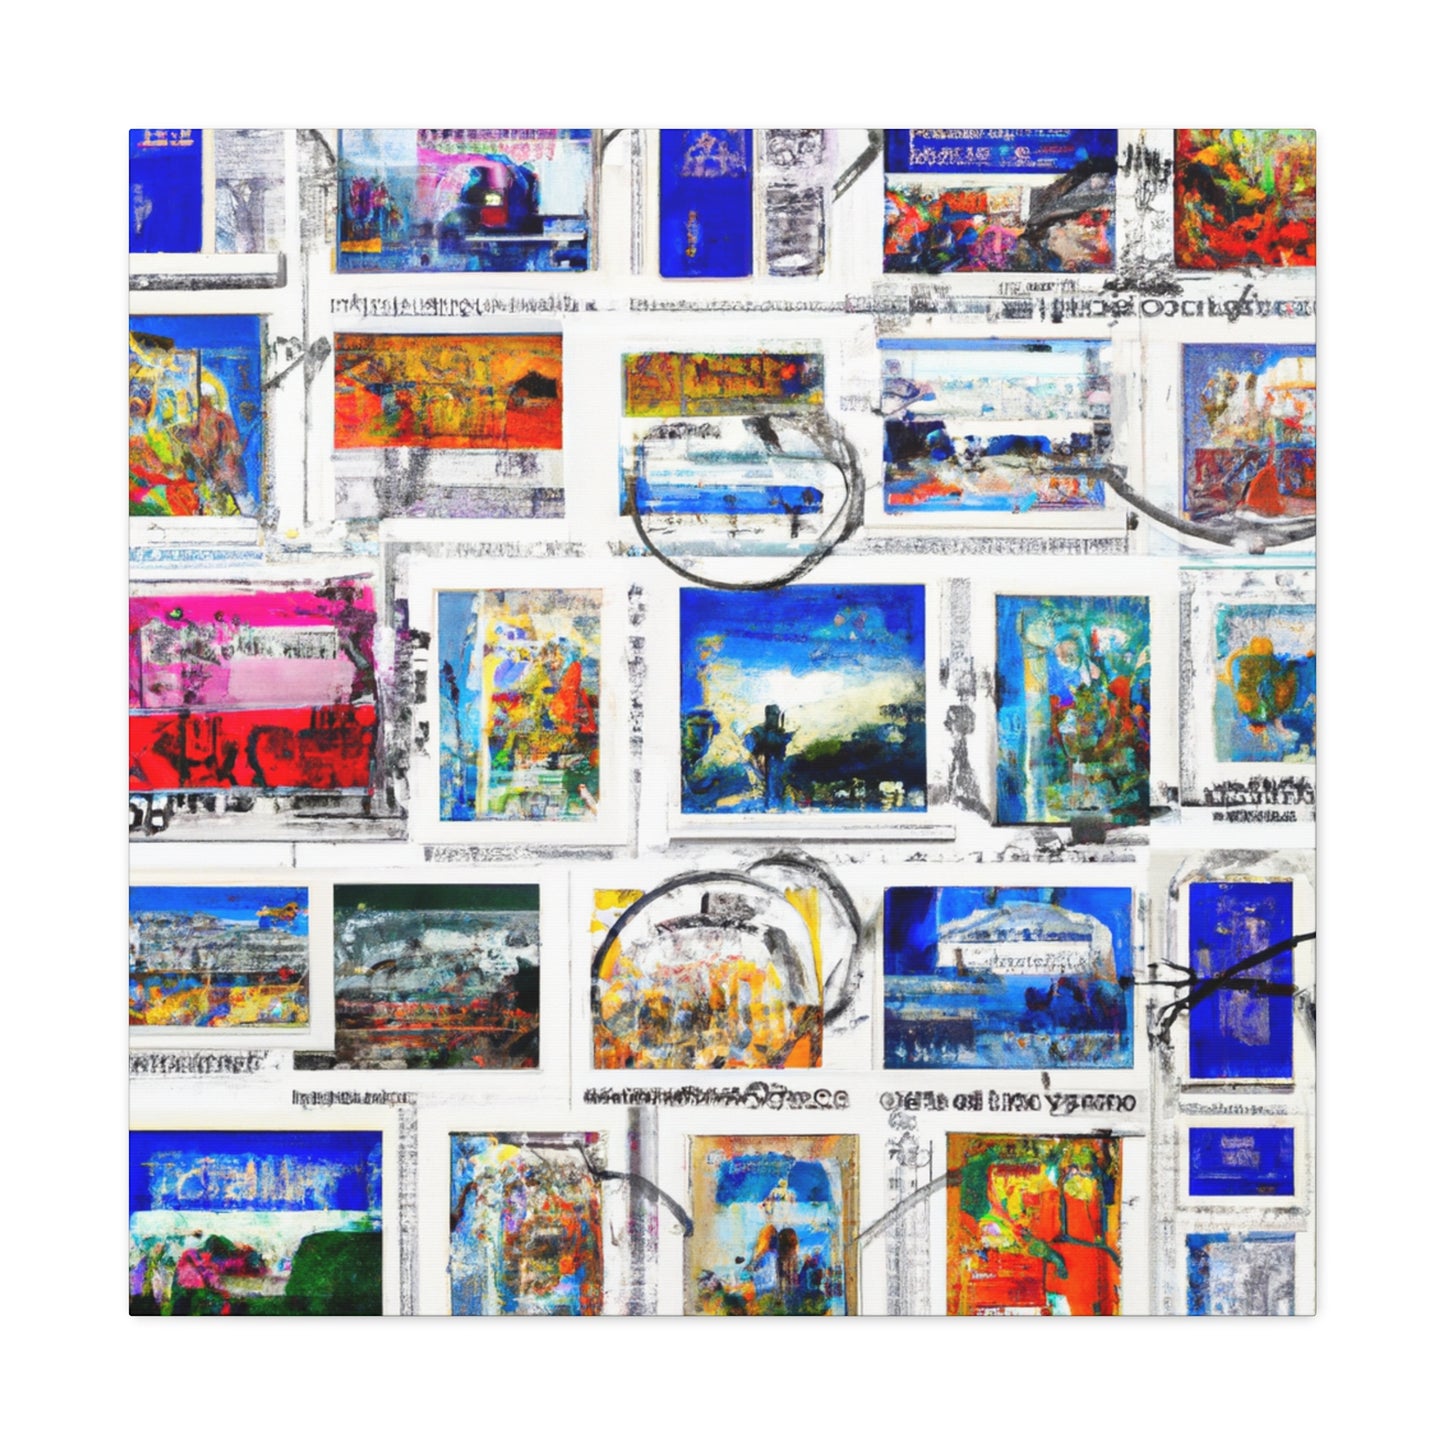 "Global Cultures Collection." - Postage Stamp Collector Canvas Wall Art